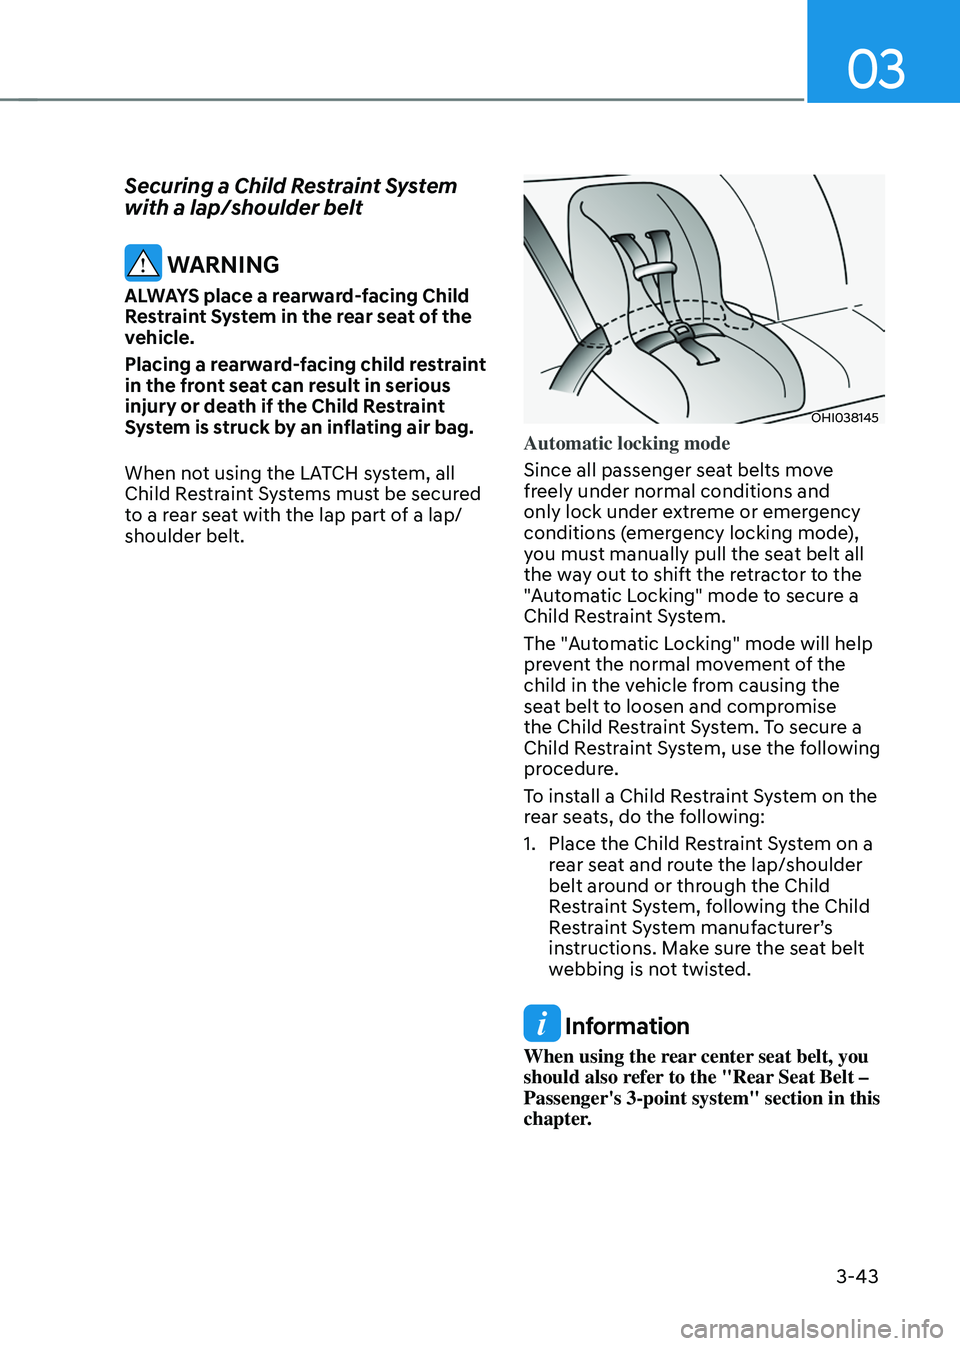 HYUNDAI TUCSON 2022  Owners Manual 03
3-43
Securing a Child Restraint System 
with a lap/shoulder belt
 WARNING
ALWAYS place a rearward-facing Child 
Restraint System in the rear seat of the 
vehicle.
Placing a rearward-facing child re